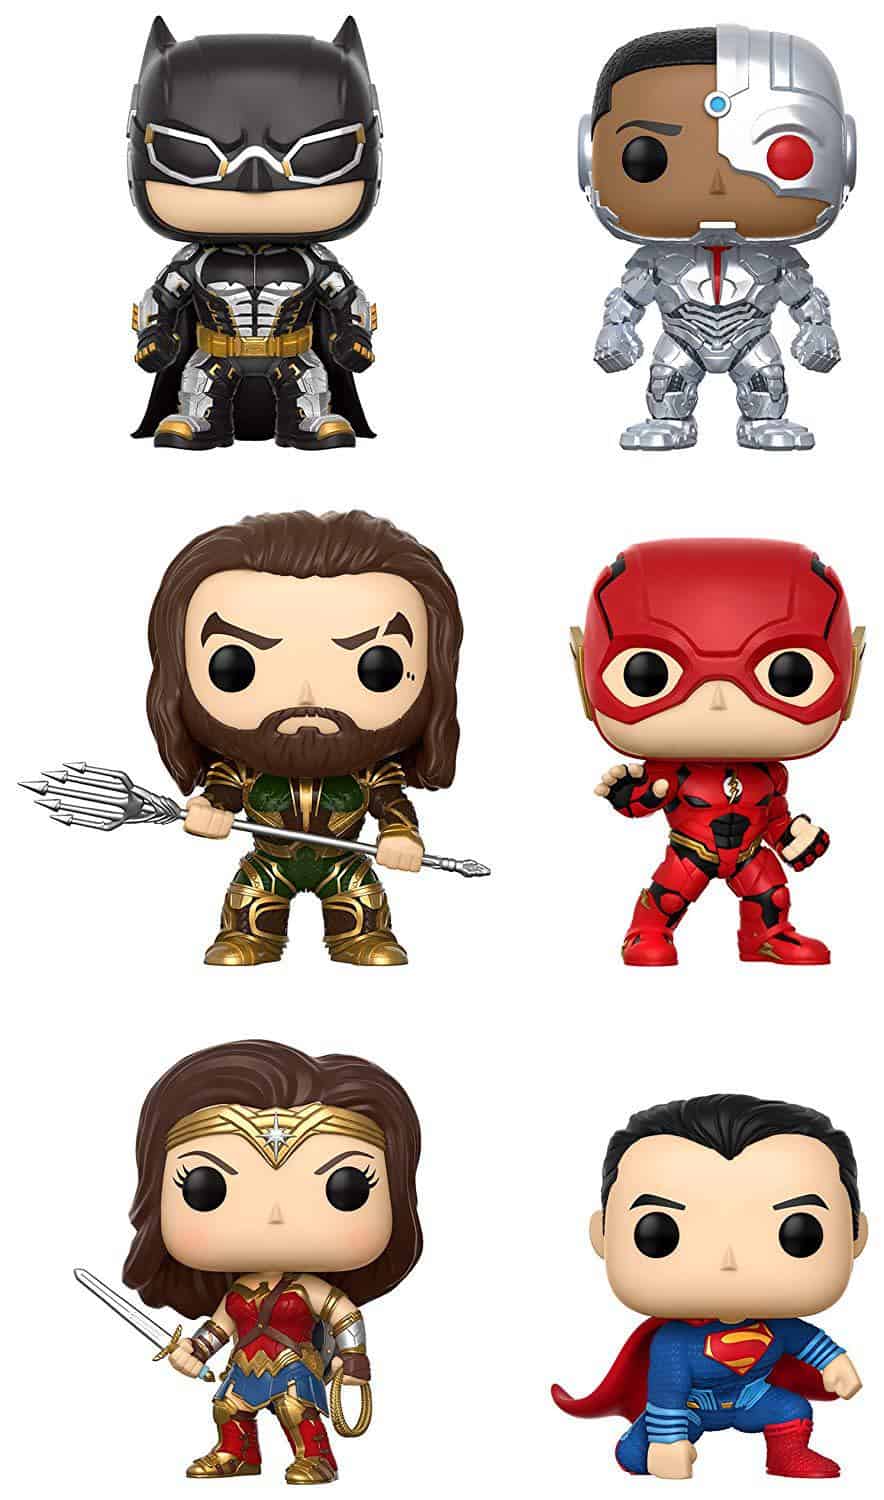 2 Unique Justice League Funko Pop Variant For You To Choose From 3